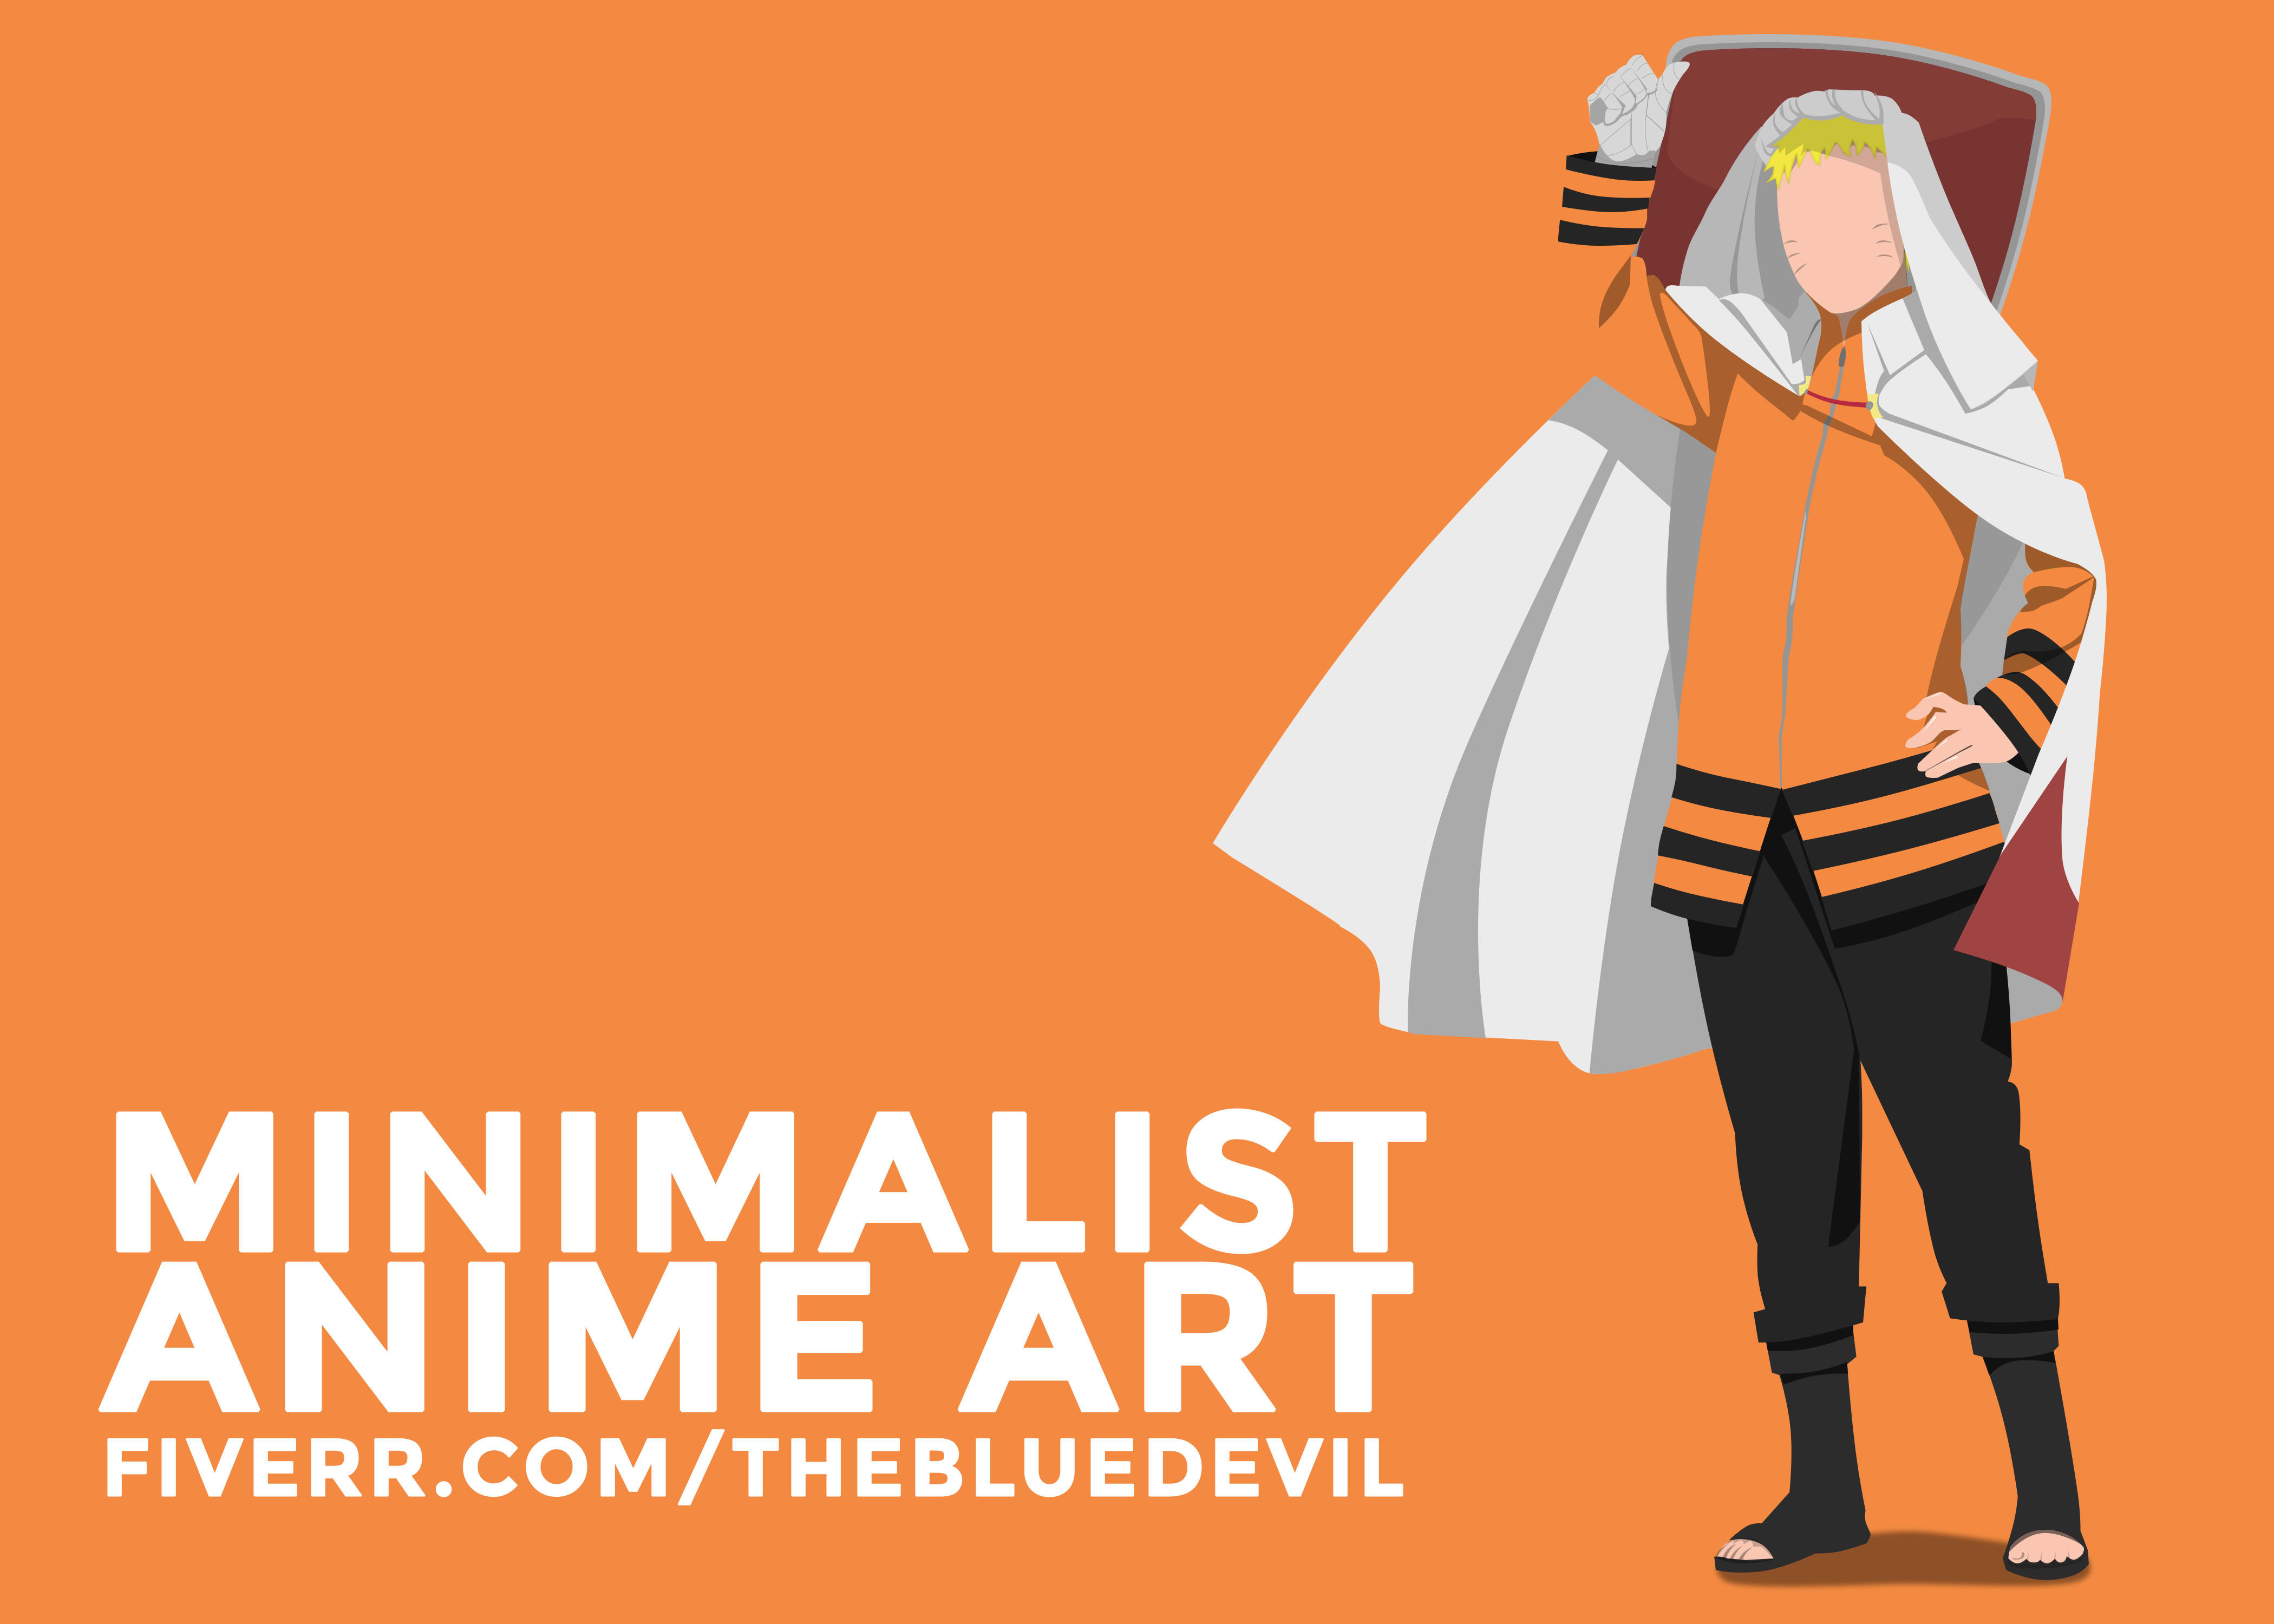 Make minimalist anime art from anything by Thebluedevil | Fiverr